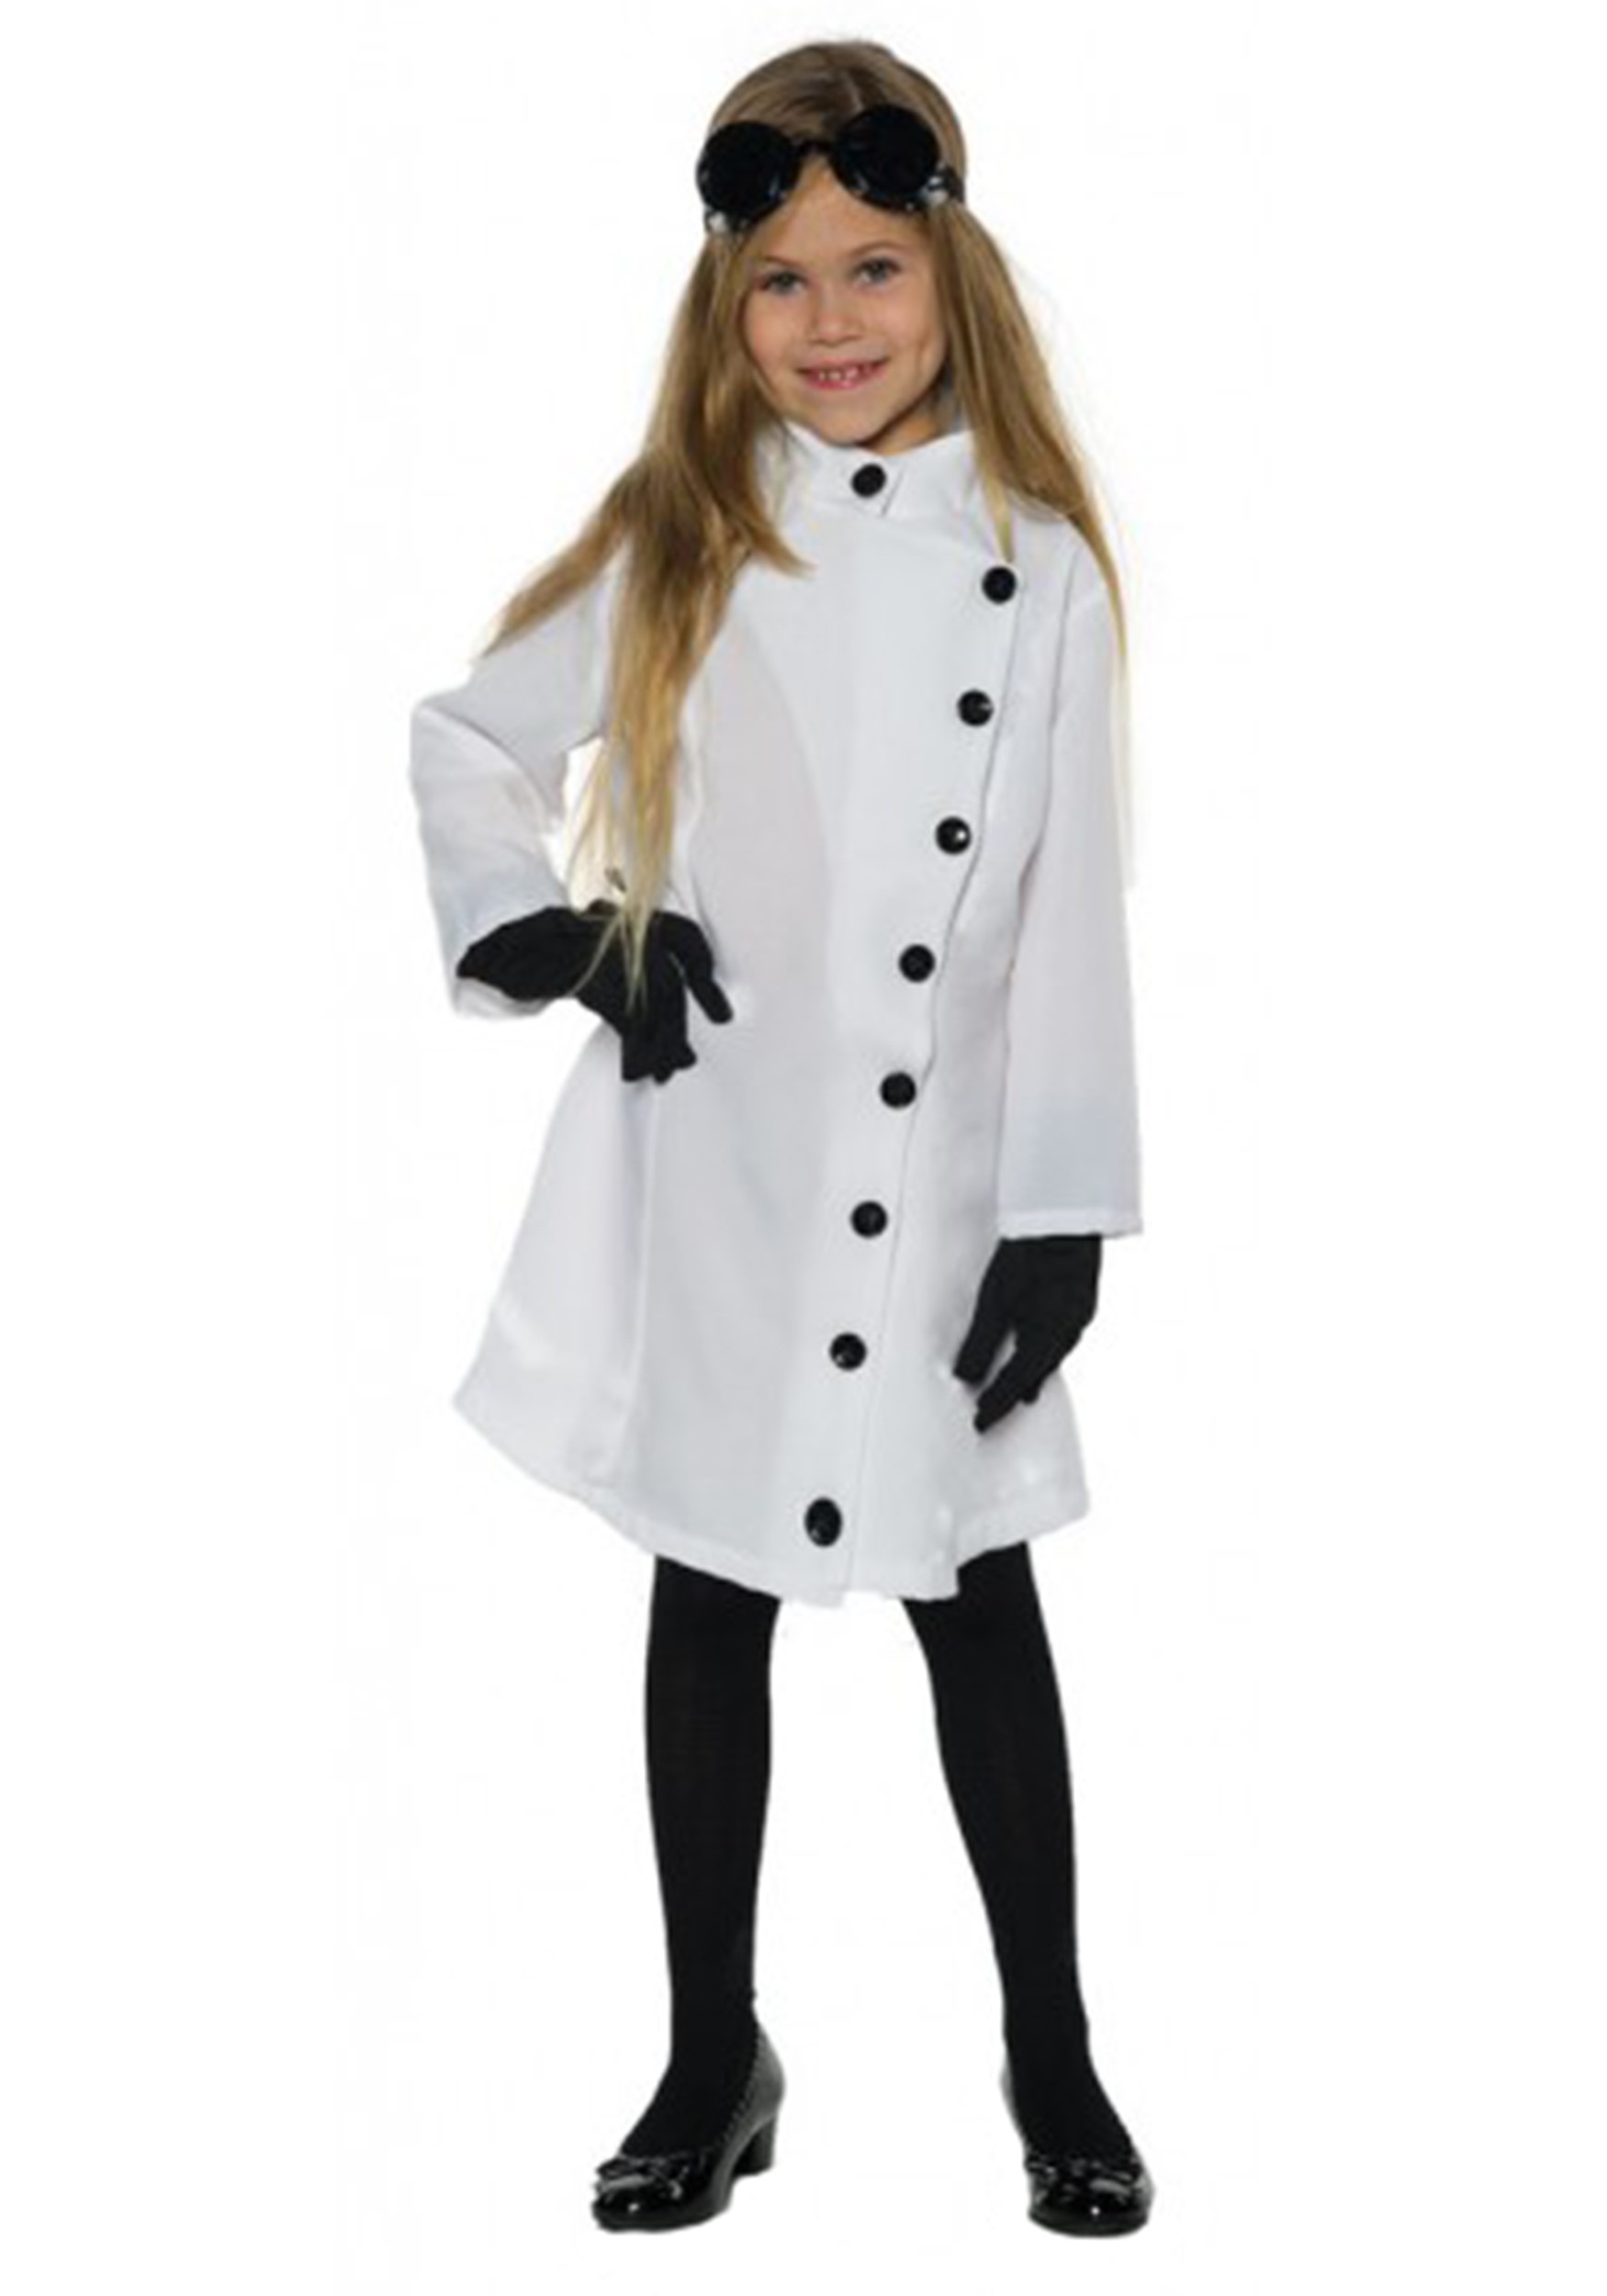 Mad Scientist Costume for Girls